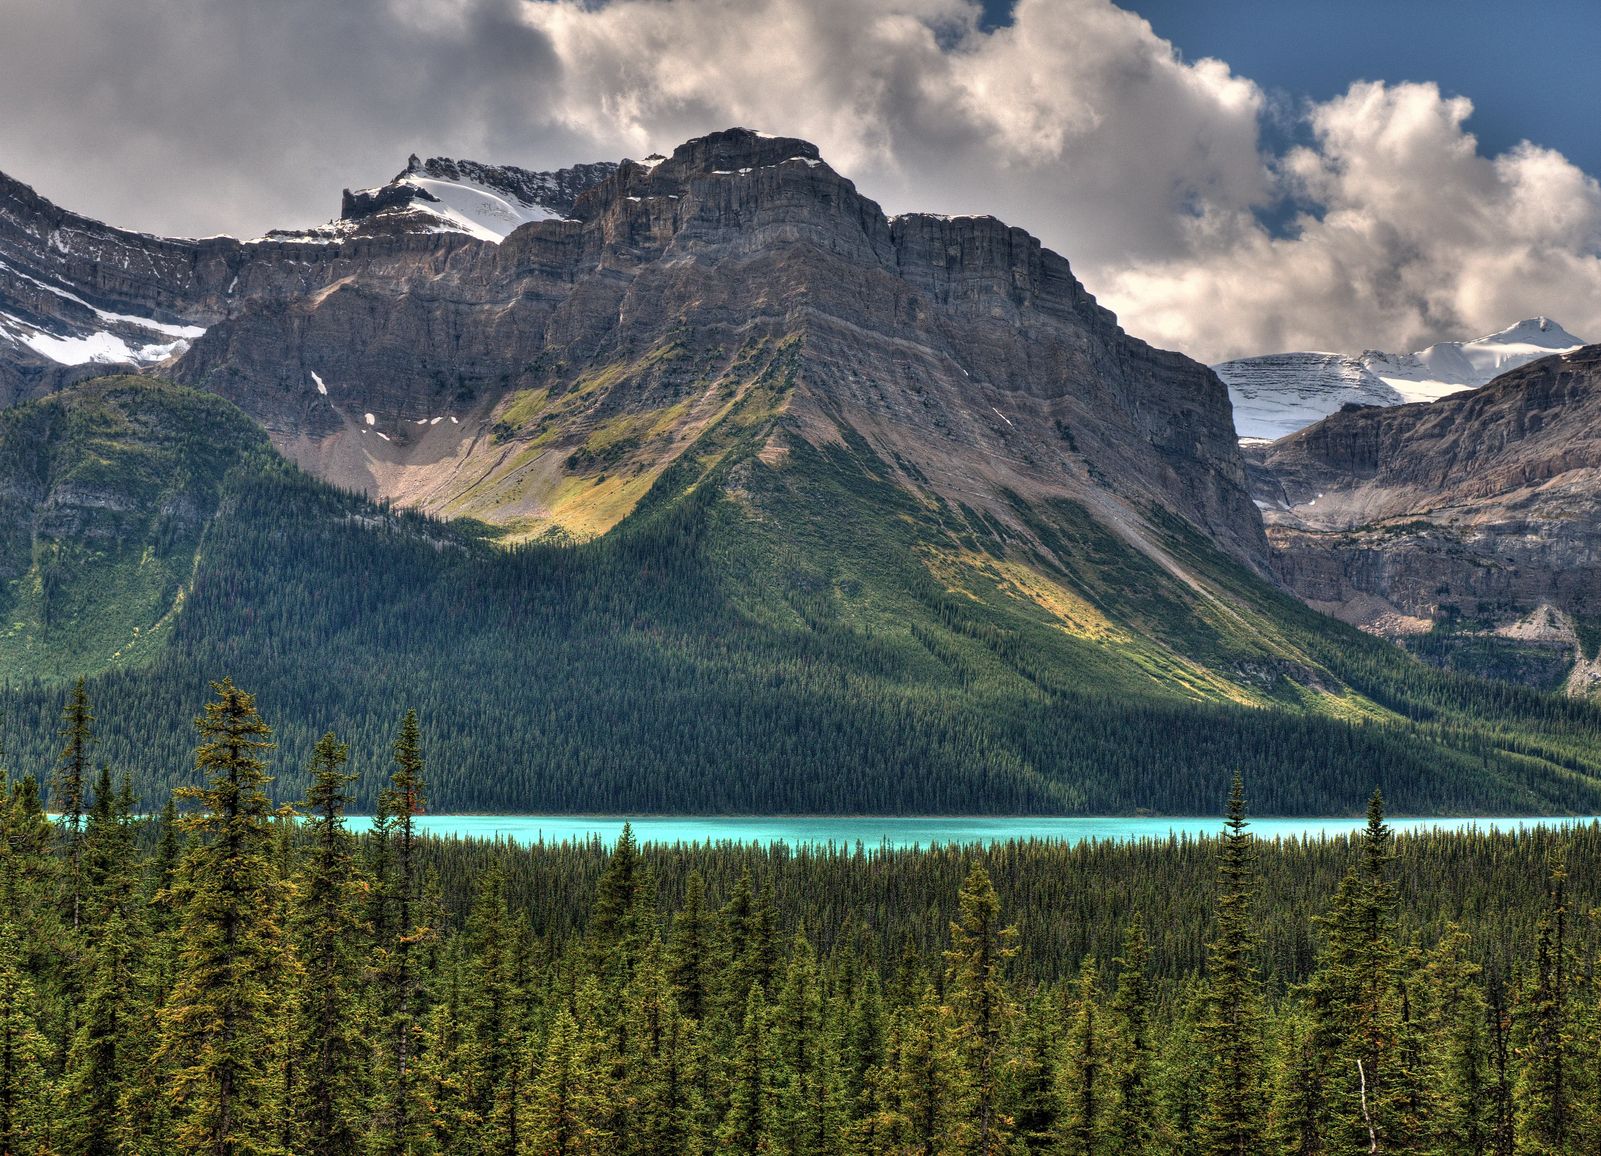 Hector Lake Viewpoint - The BEST of the Icefields Parkway Banff